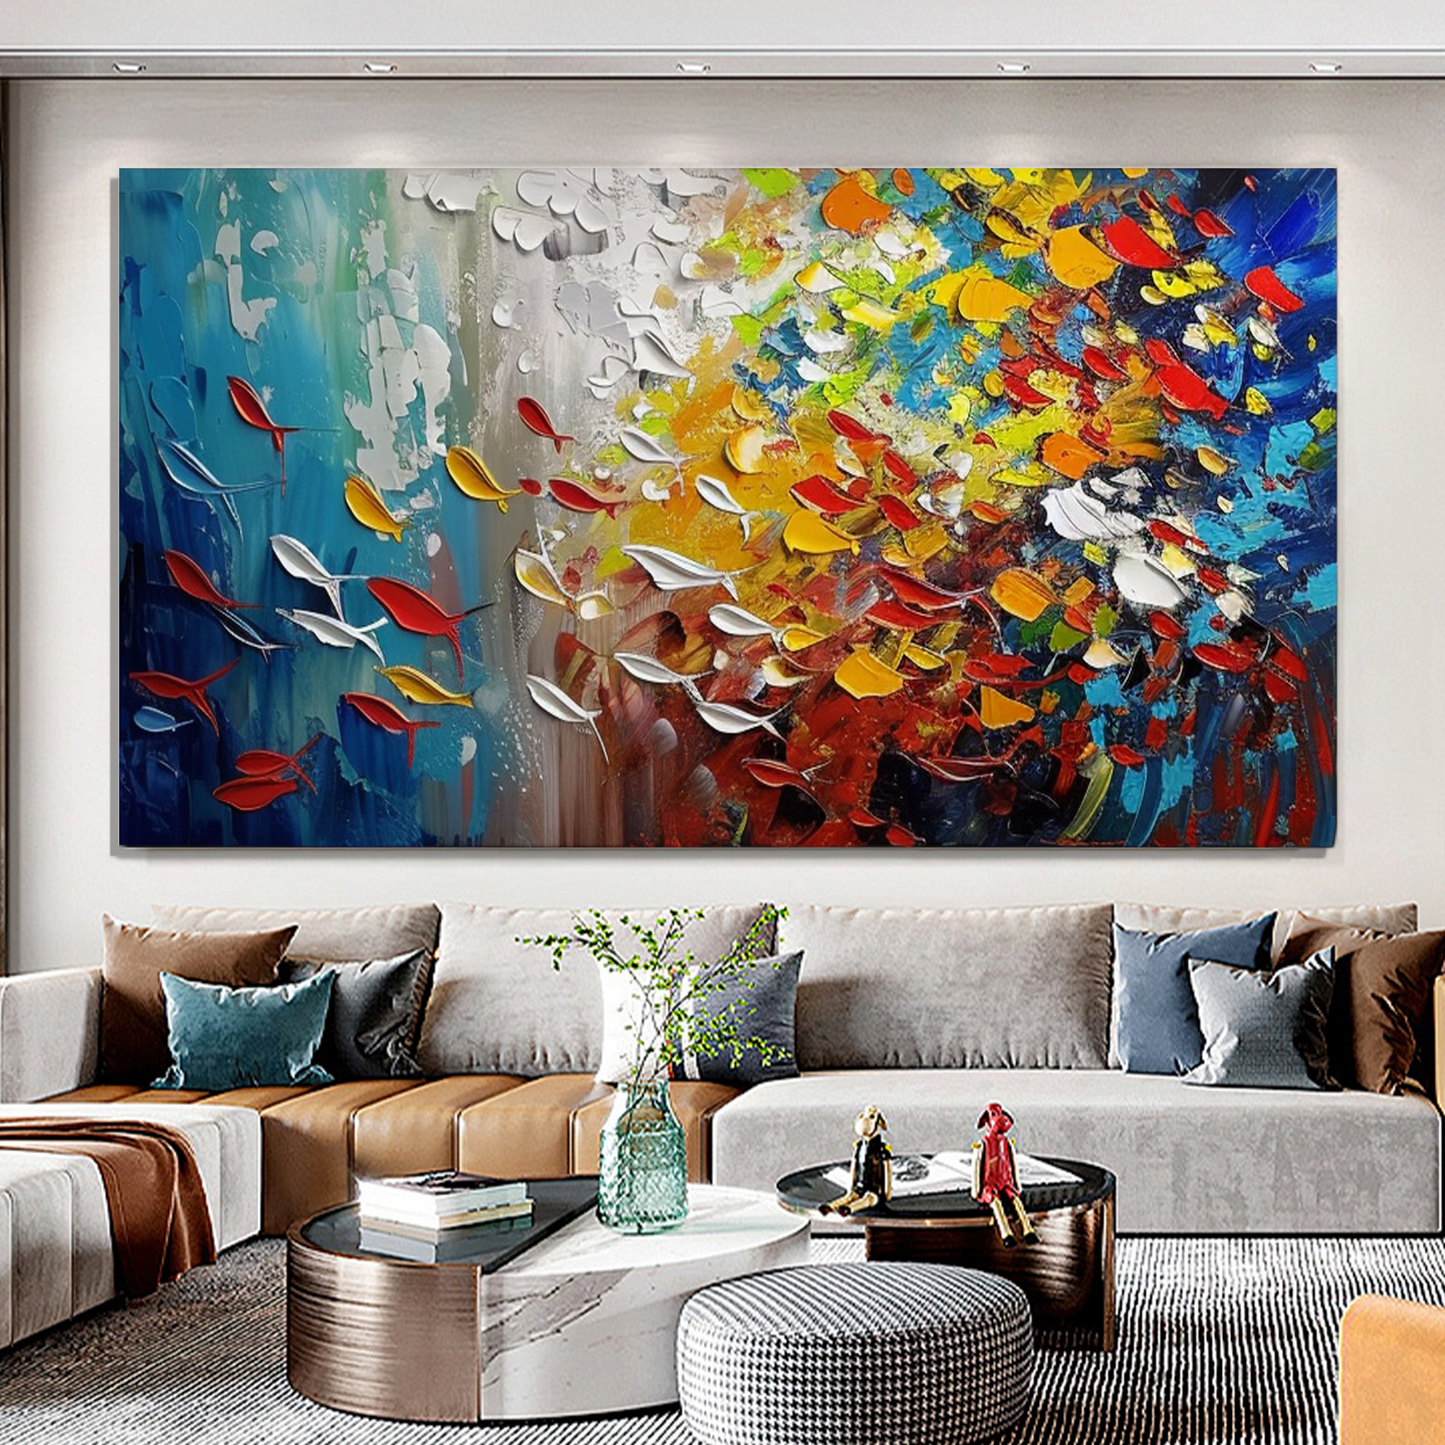 3D Textured Art On Canvas "Colorful Symphony"